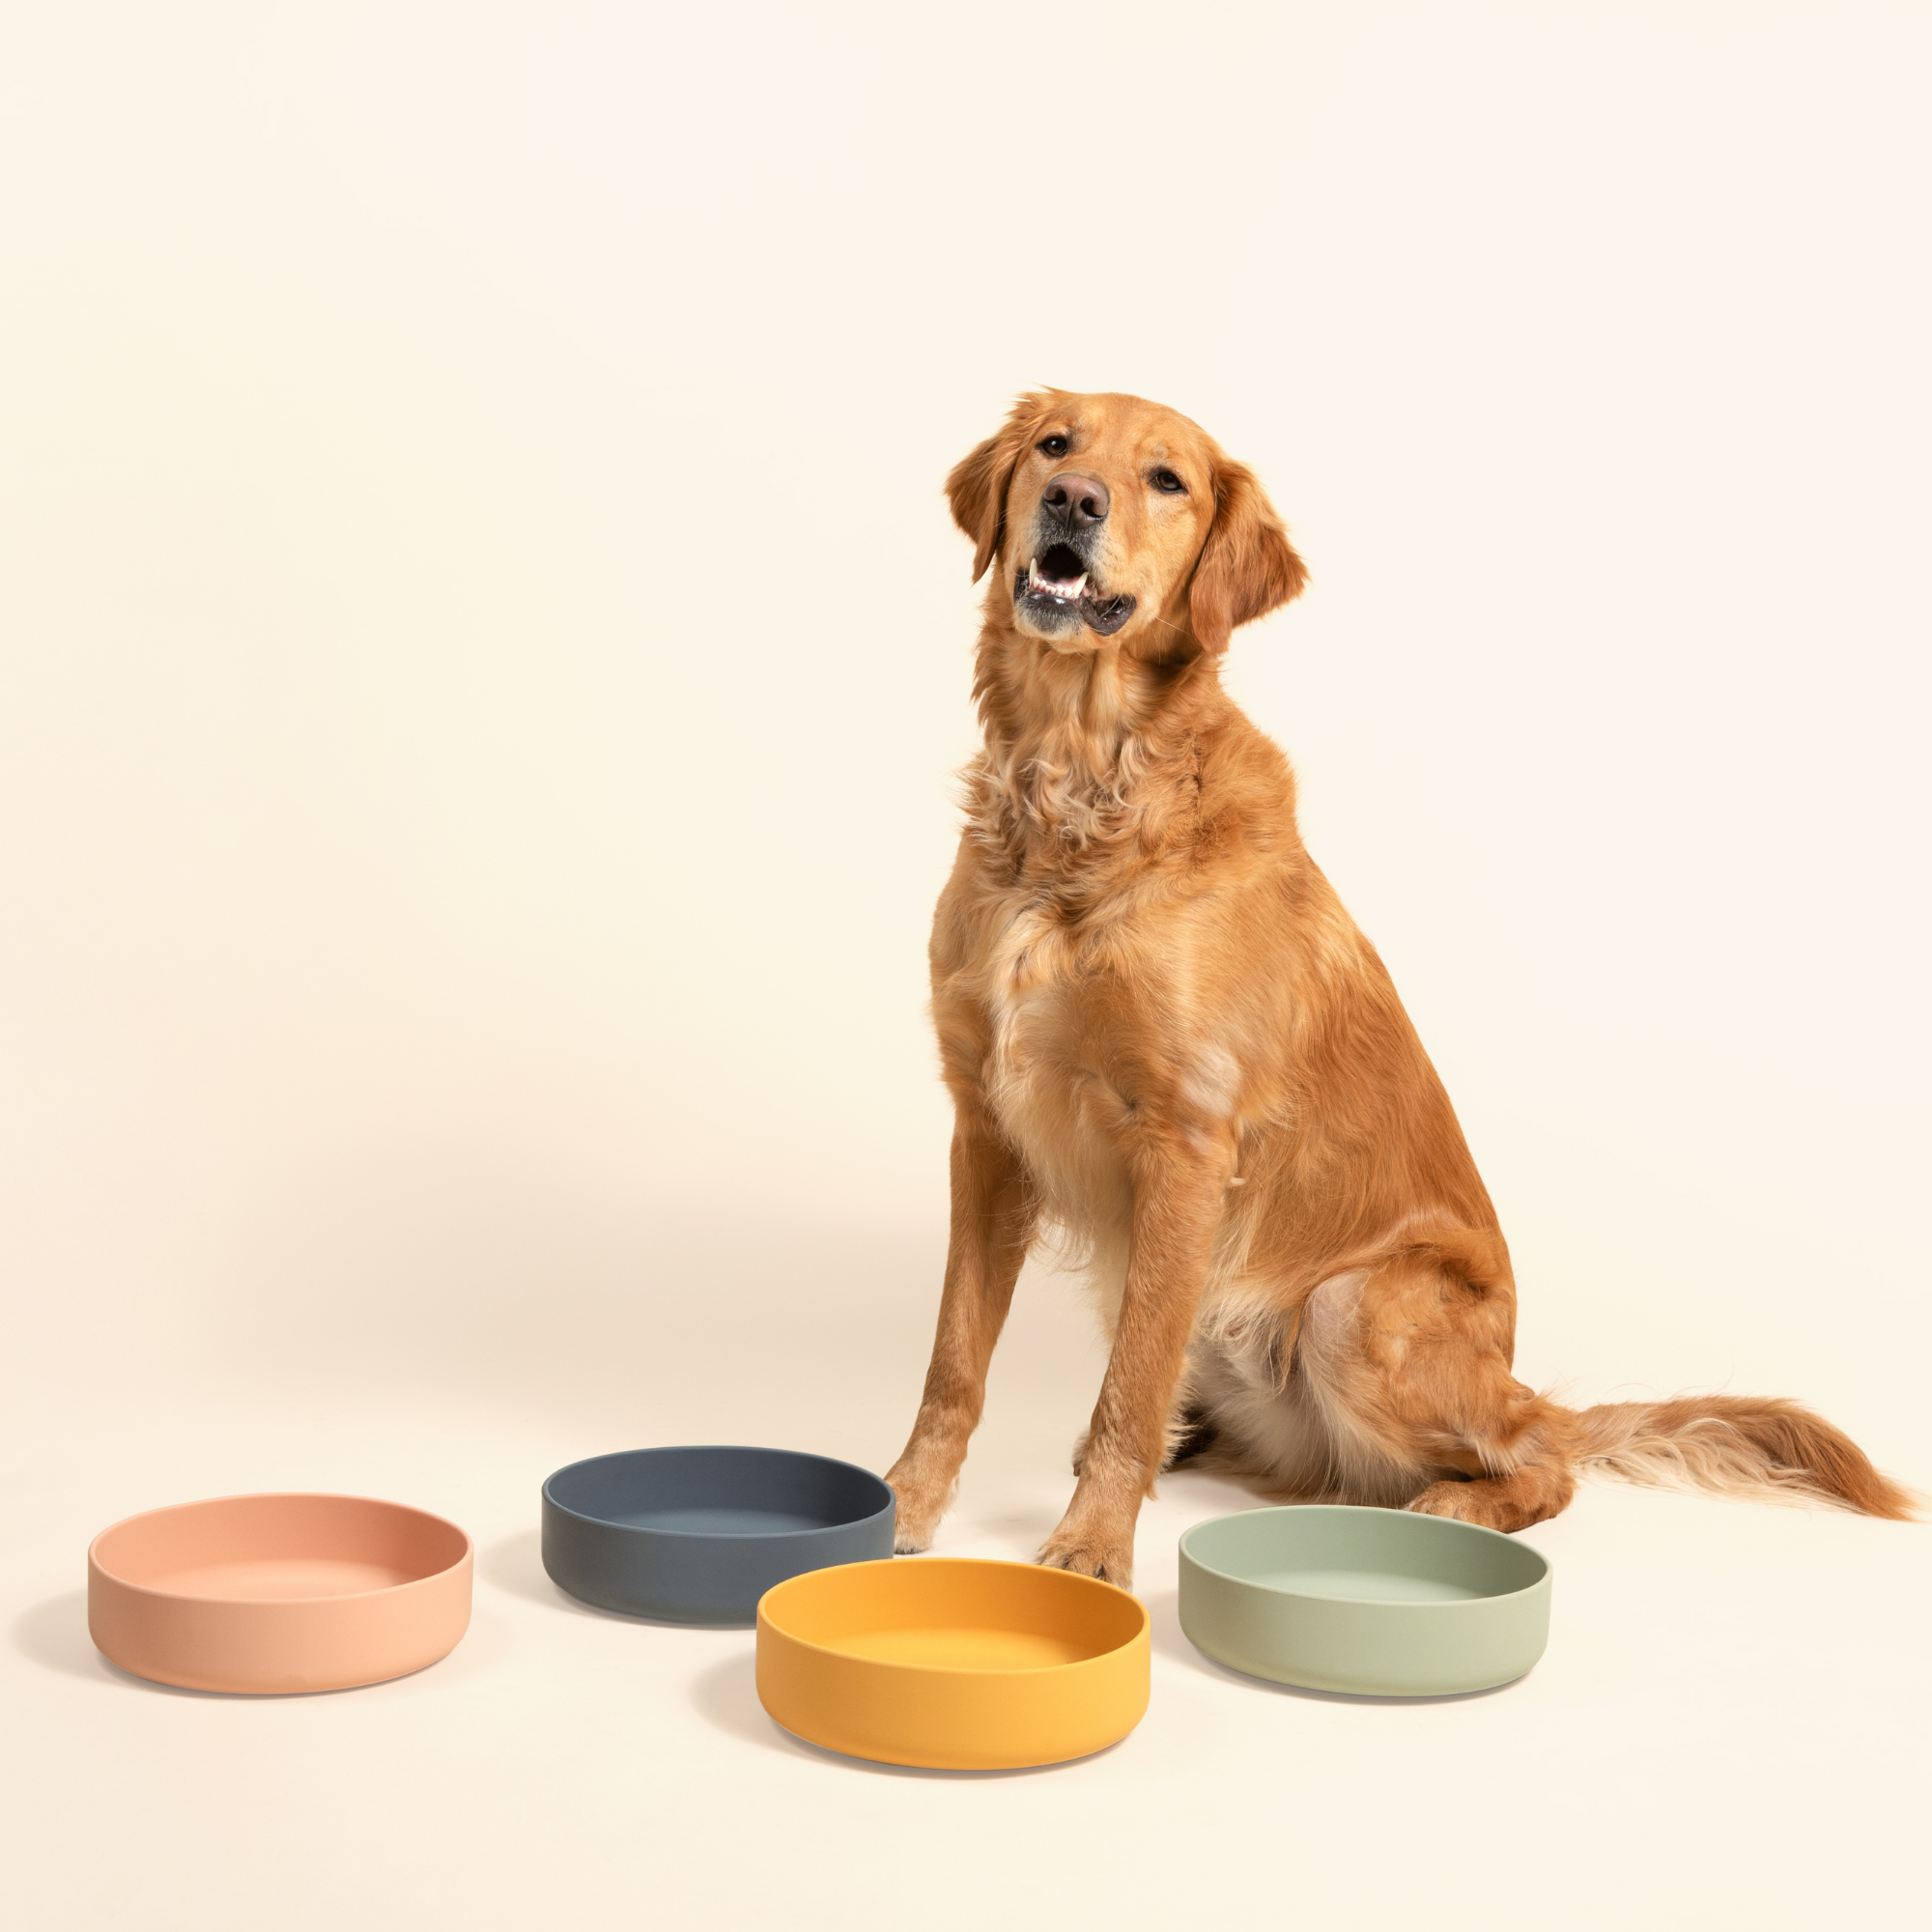 The Large Perfect Dish: Spill-Proof Silicone Pet Bowl